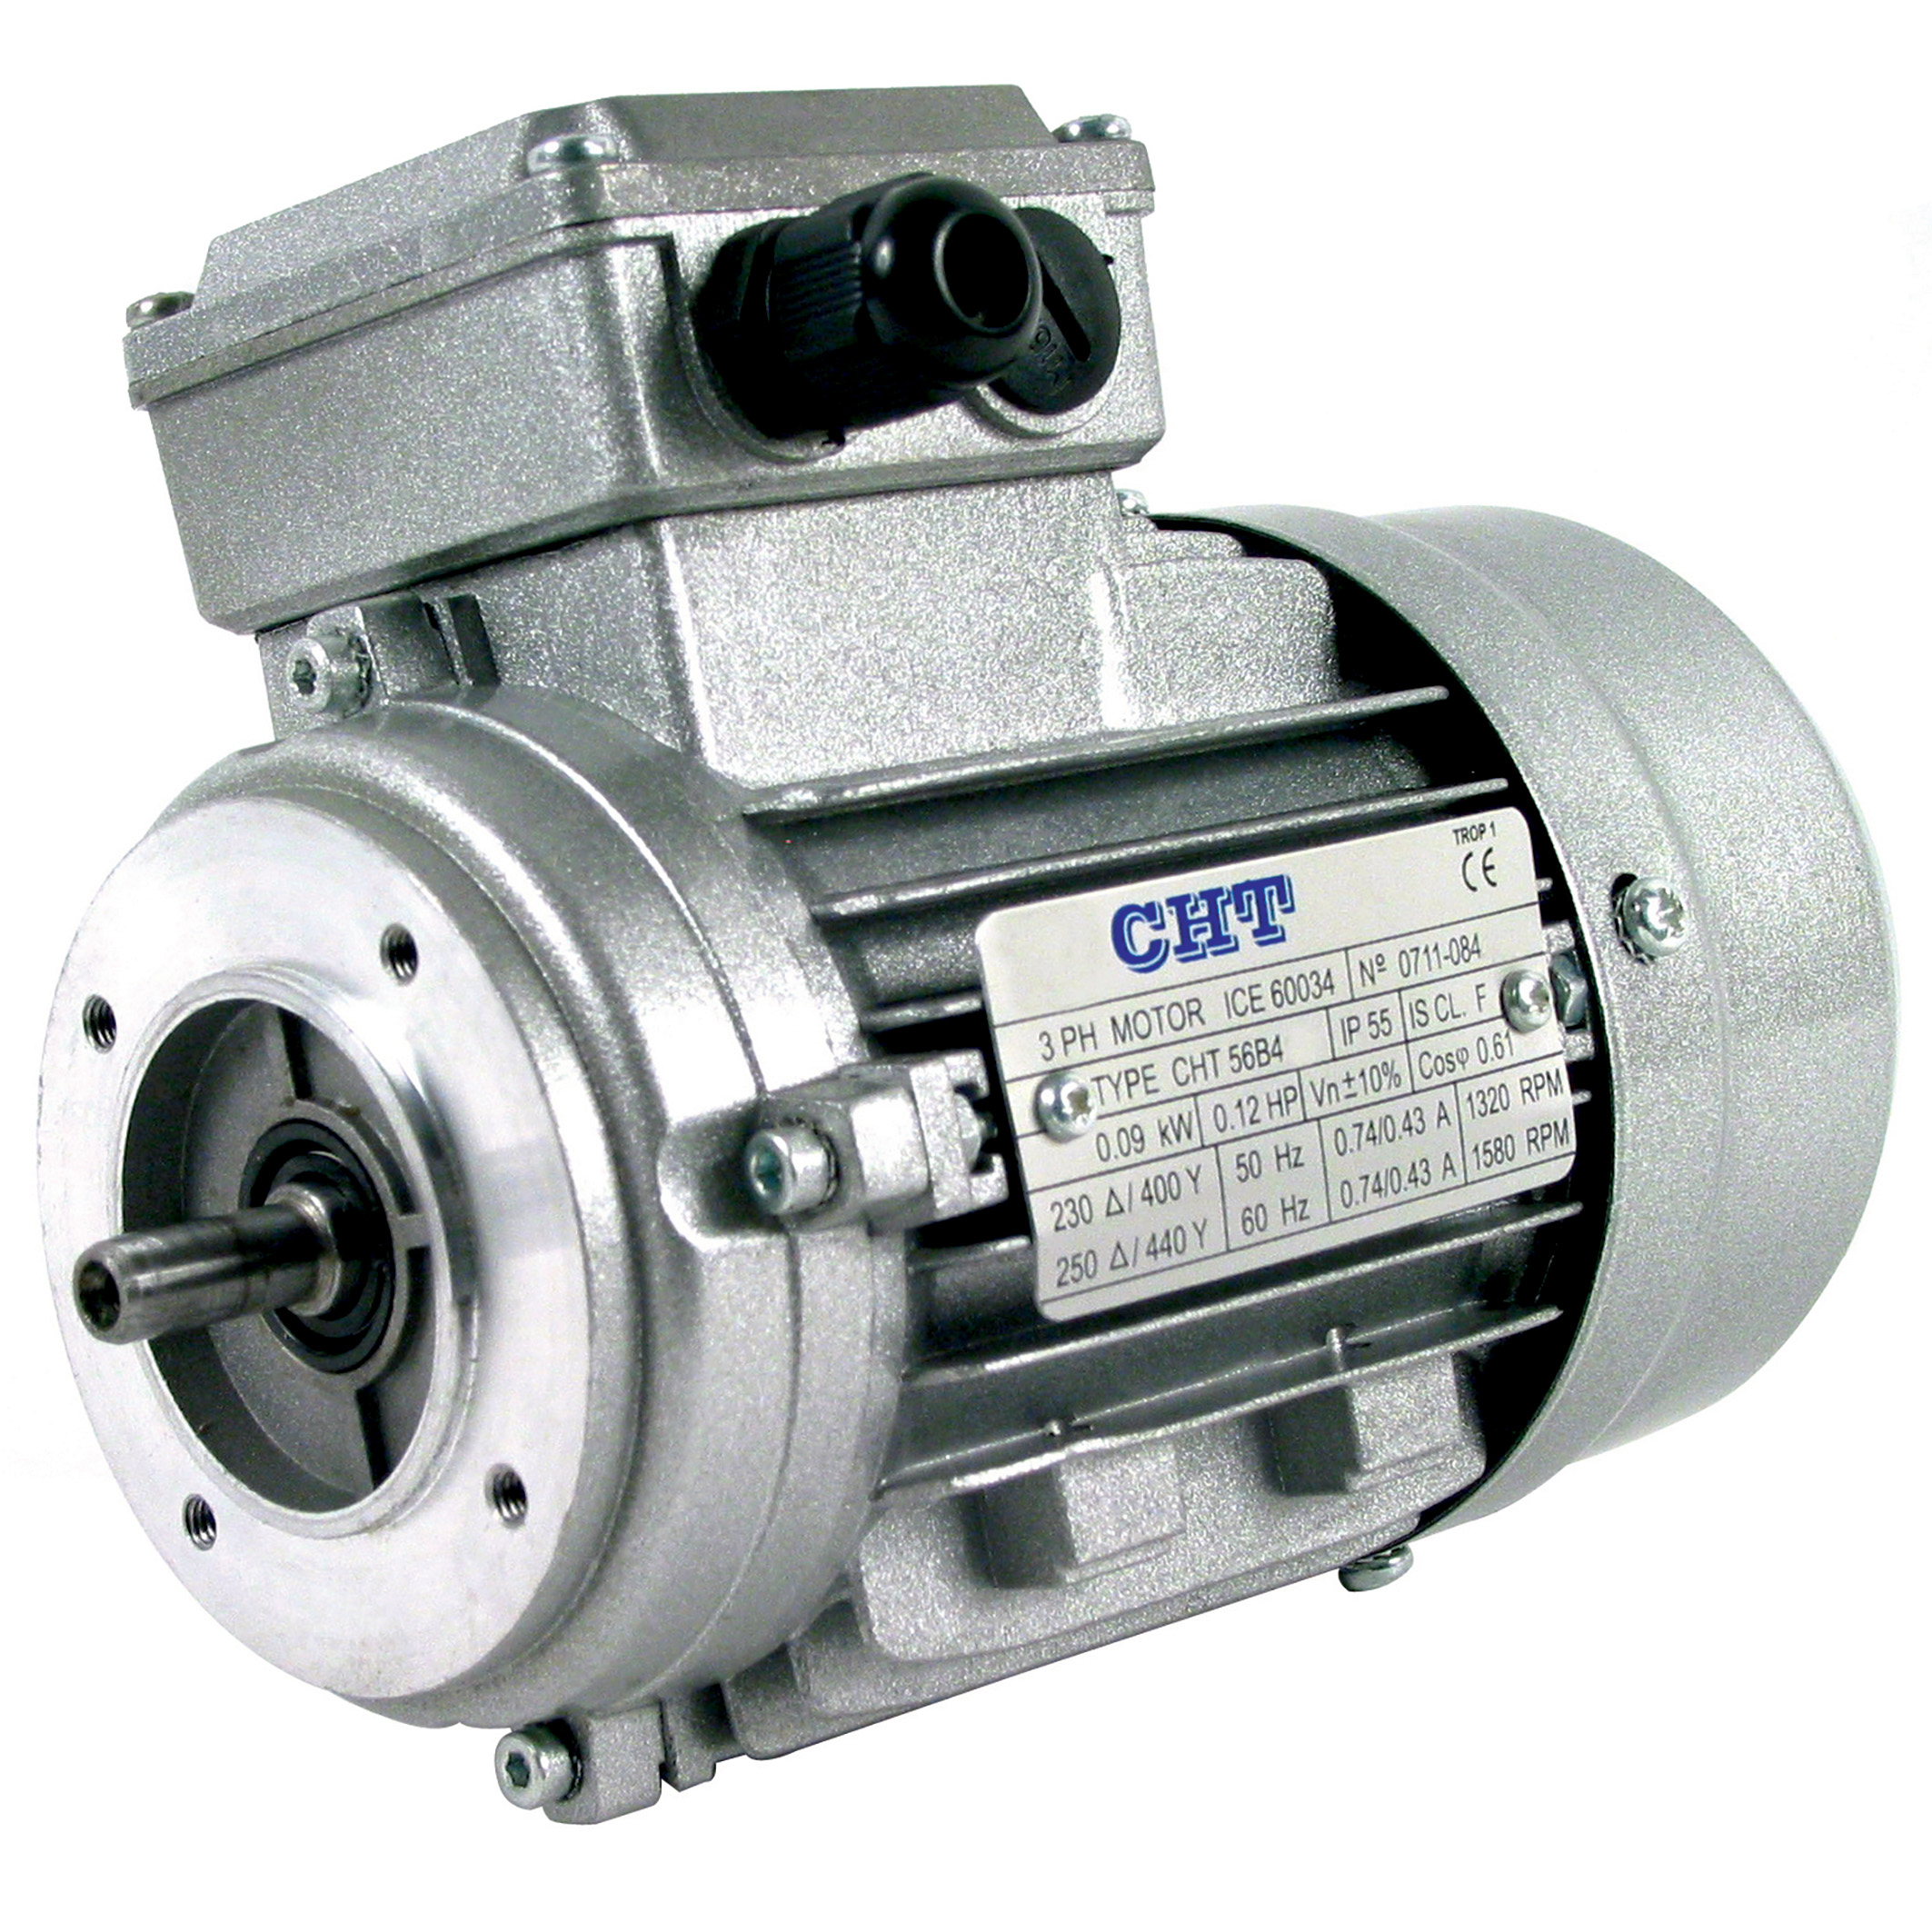 Asynchronous AC motor 0.12 to 0.22kW - 0.12 to 0.22kW - up to1.77Nm - three phase